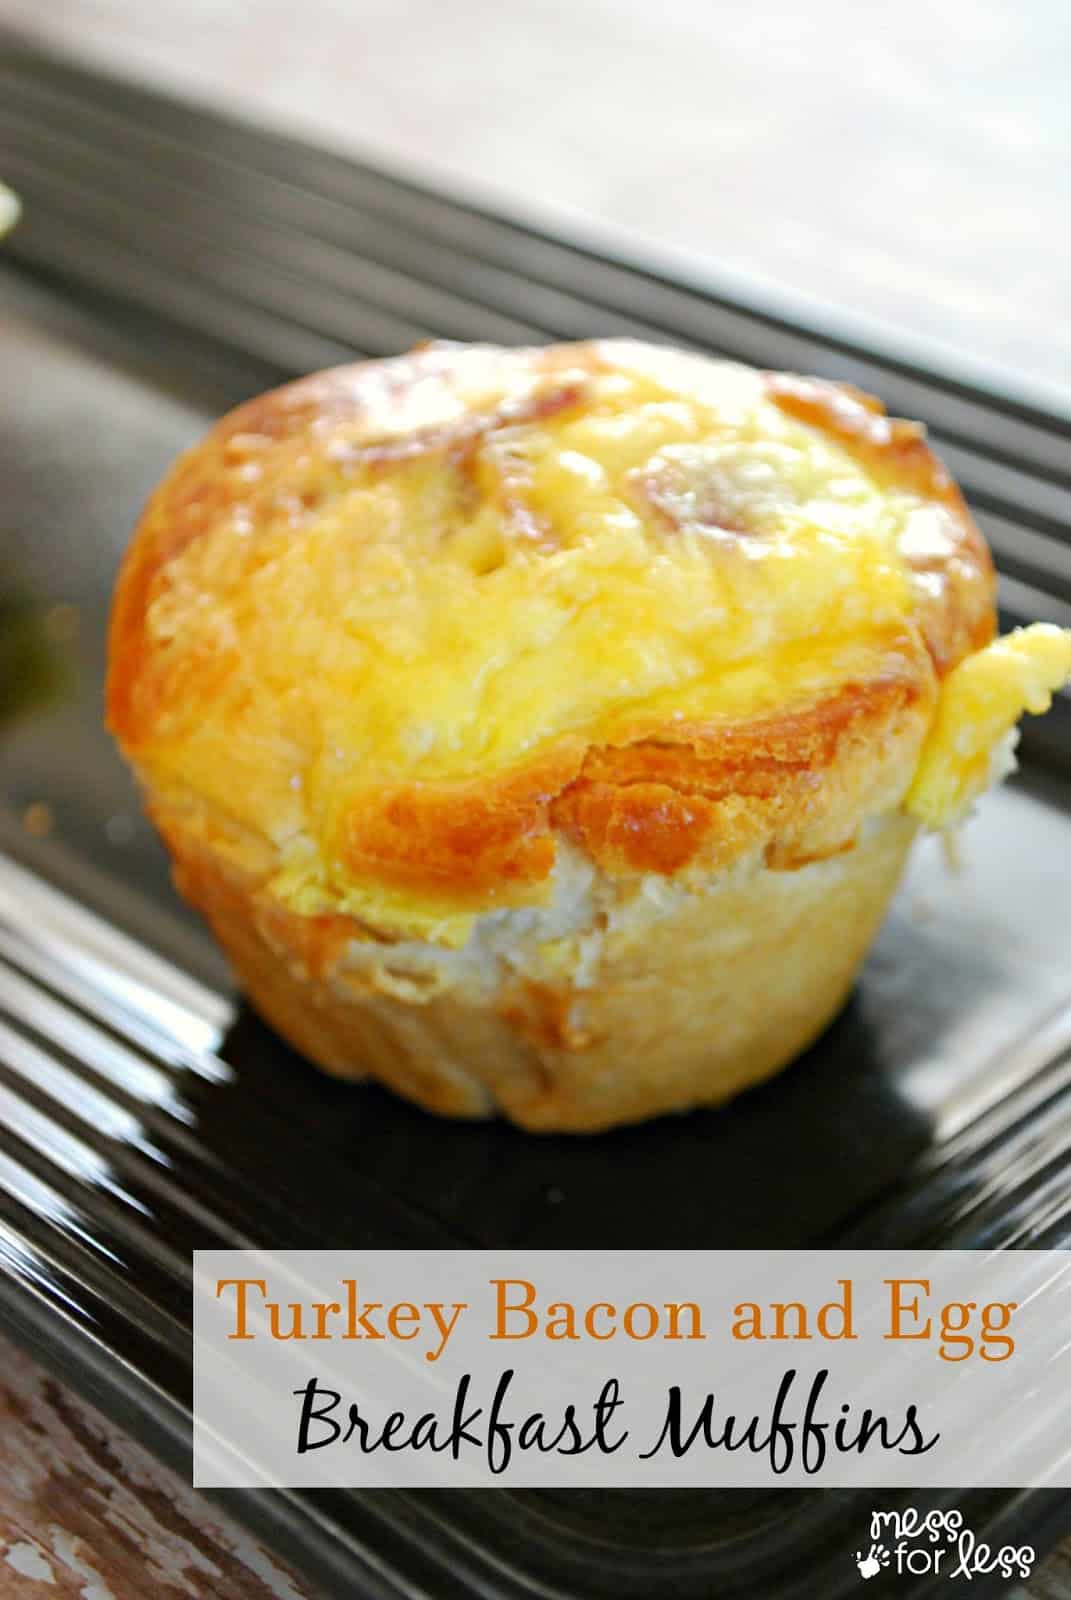 Turkey Bacon and Egg Breakfast Muffins made with Butterball Turkey Bacon - I love how these are portion controlled and they remind me of a classic all-American breakfast. #sponsored 